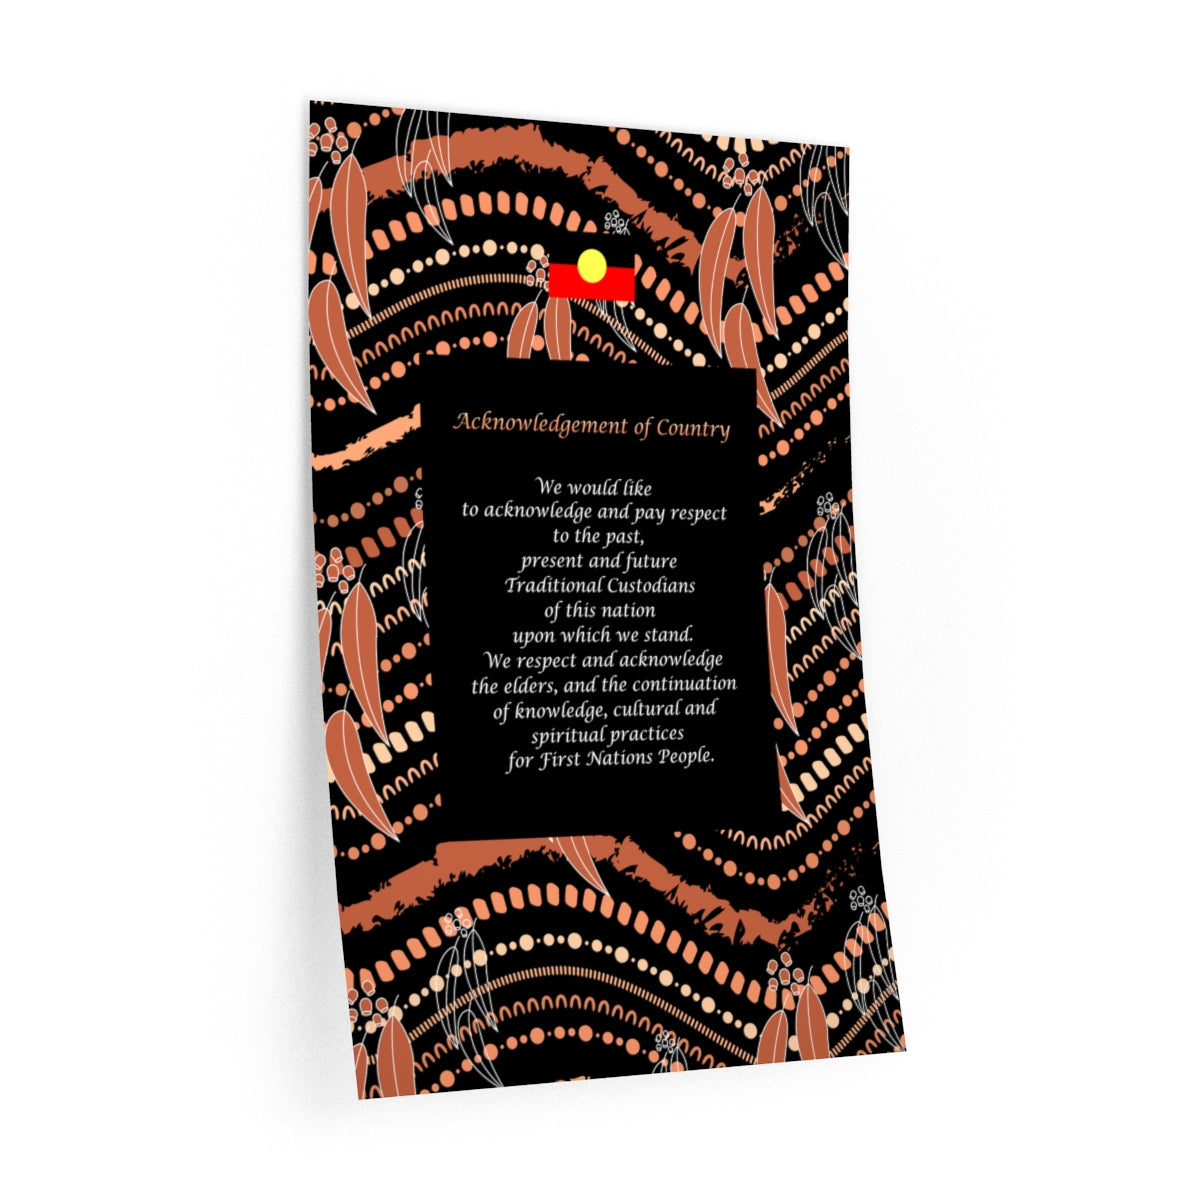 Blue Gum III - Acknowledgement of Country - Wall Decals